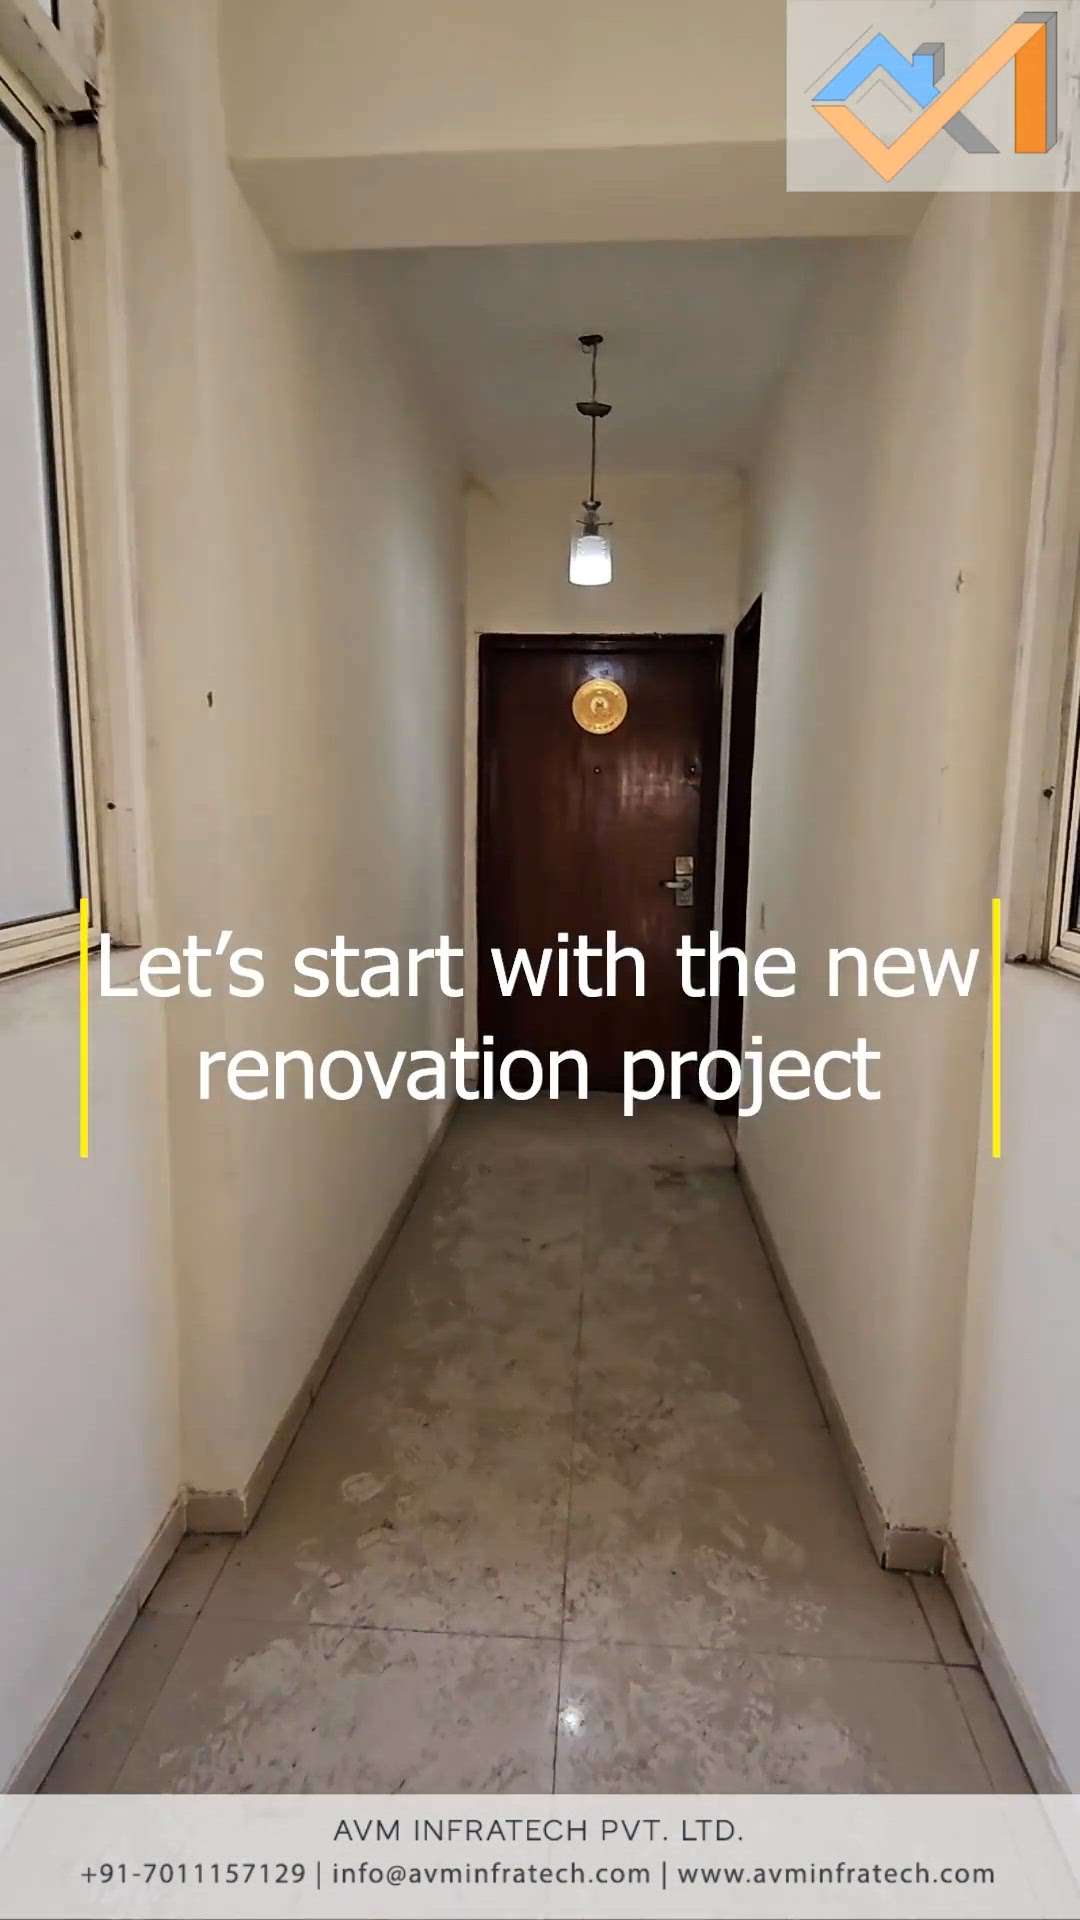 Let's start with the new renovation project!


Follow us for more such amazing updates. 
.
.
#newproject #project #renovation #renovate #revamp #renovationproject #ideas #avminfratech #houserenovation #homerenovation #homedecor #home #house #housedesign #homesweethome